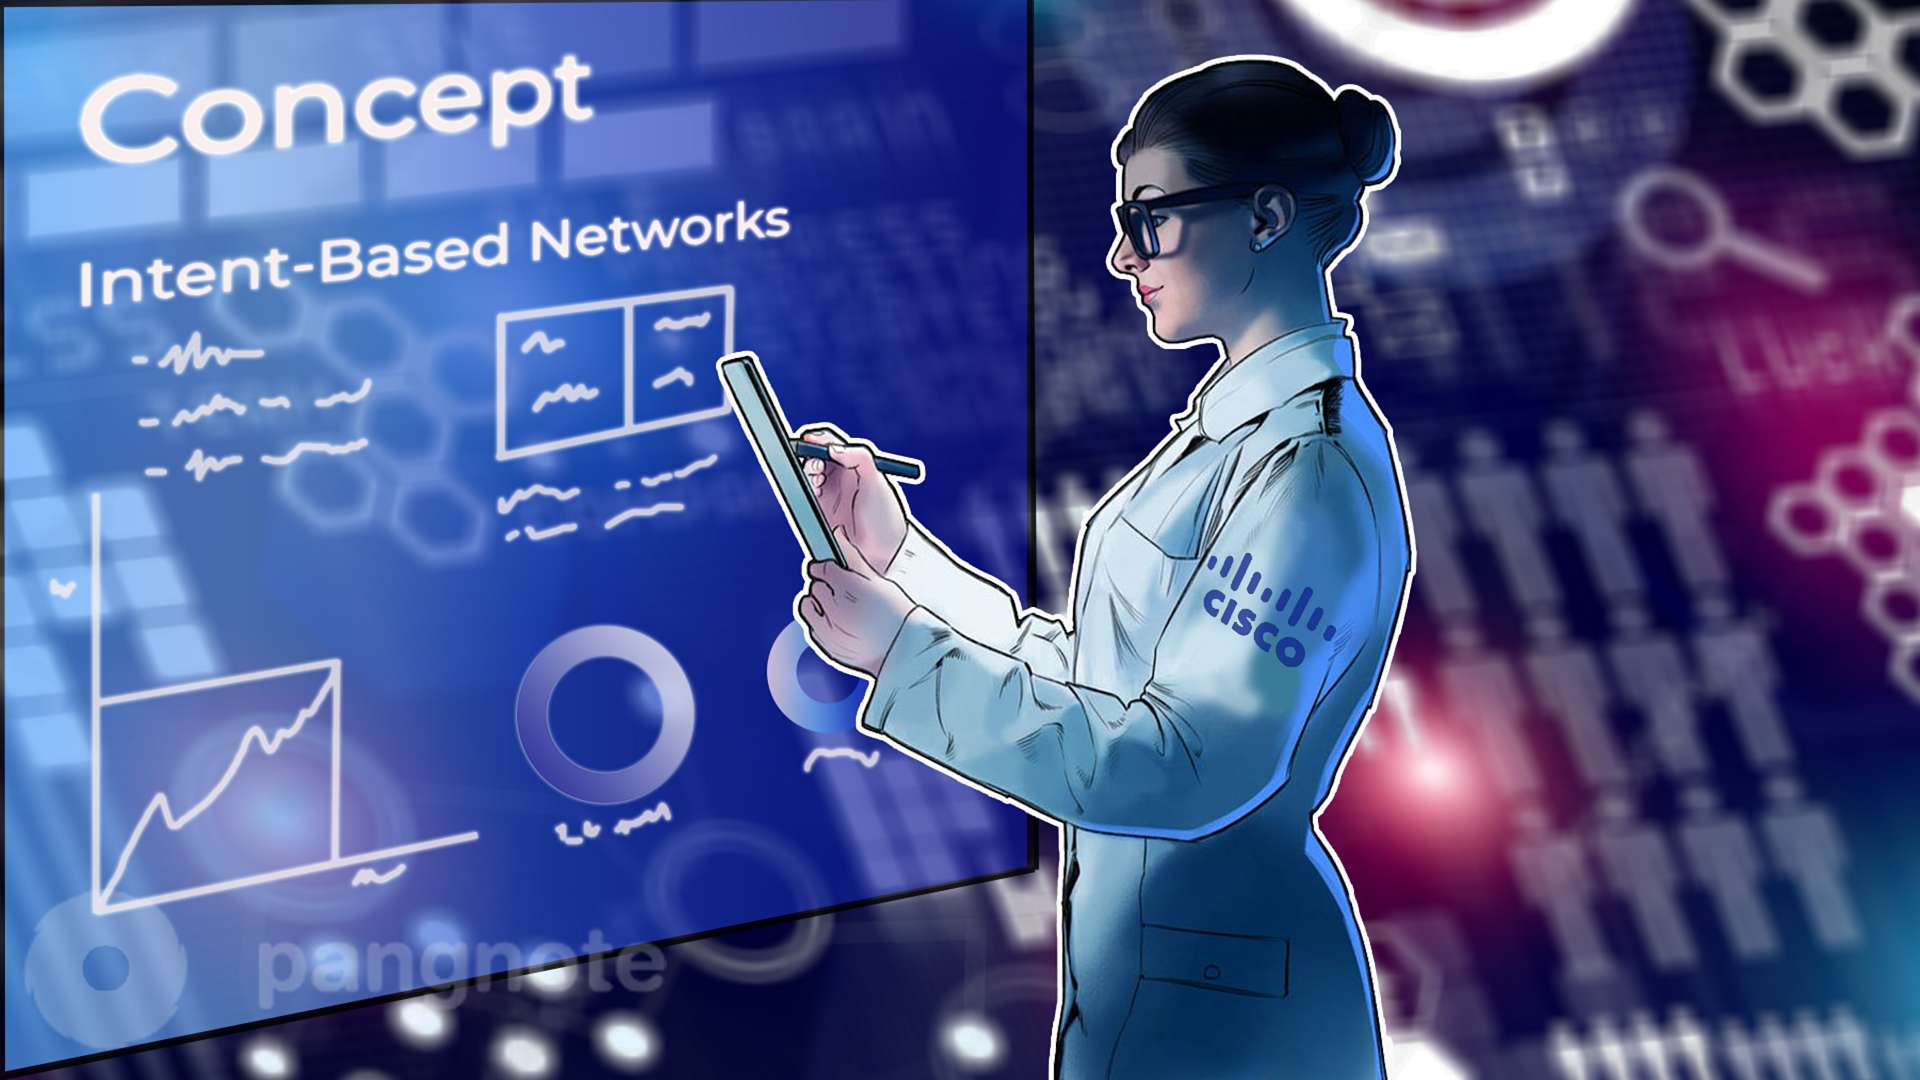 Cisco is working on the implementation of the Intent-Based Networks concept